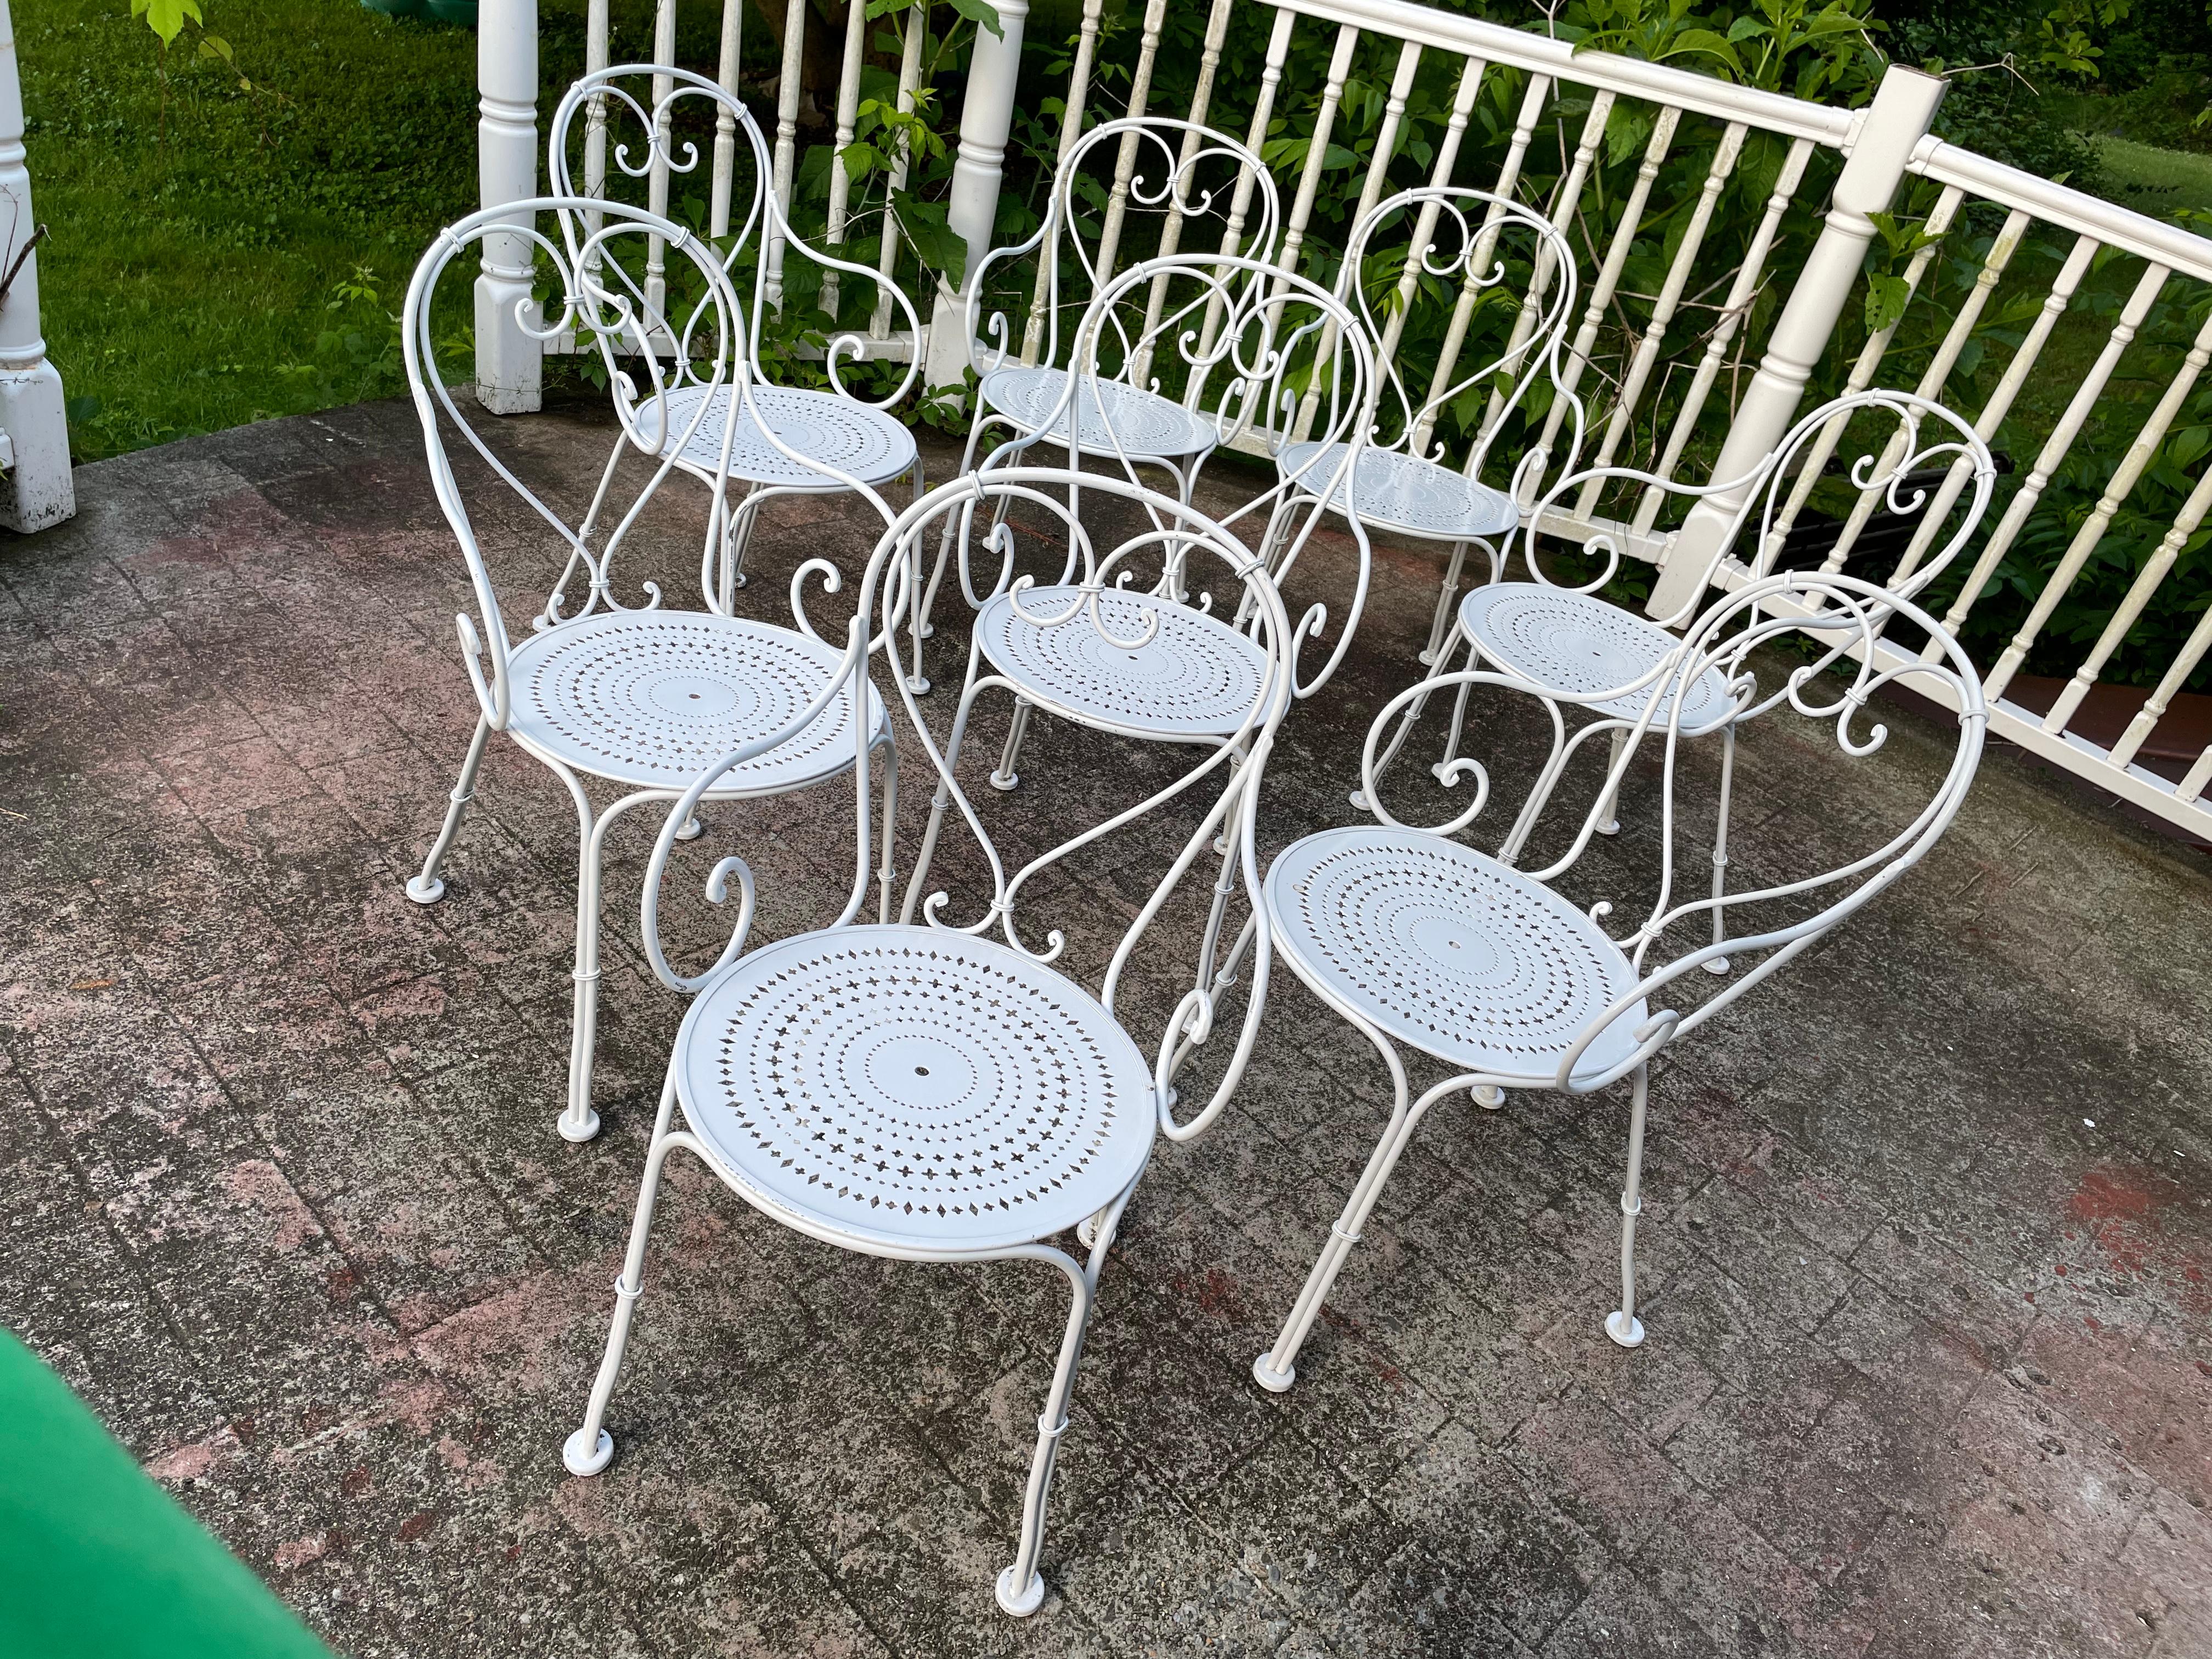 Set of 8 Wrought Iron French Cafe Chairs 
Perfect for your next outdoor gathering. Pair with one of our wrought iron 74” glass topped tables to enjoy dining service for 8. In stock and ready to ship today.